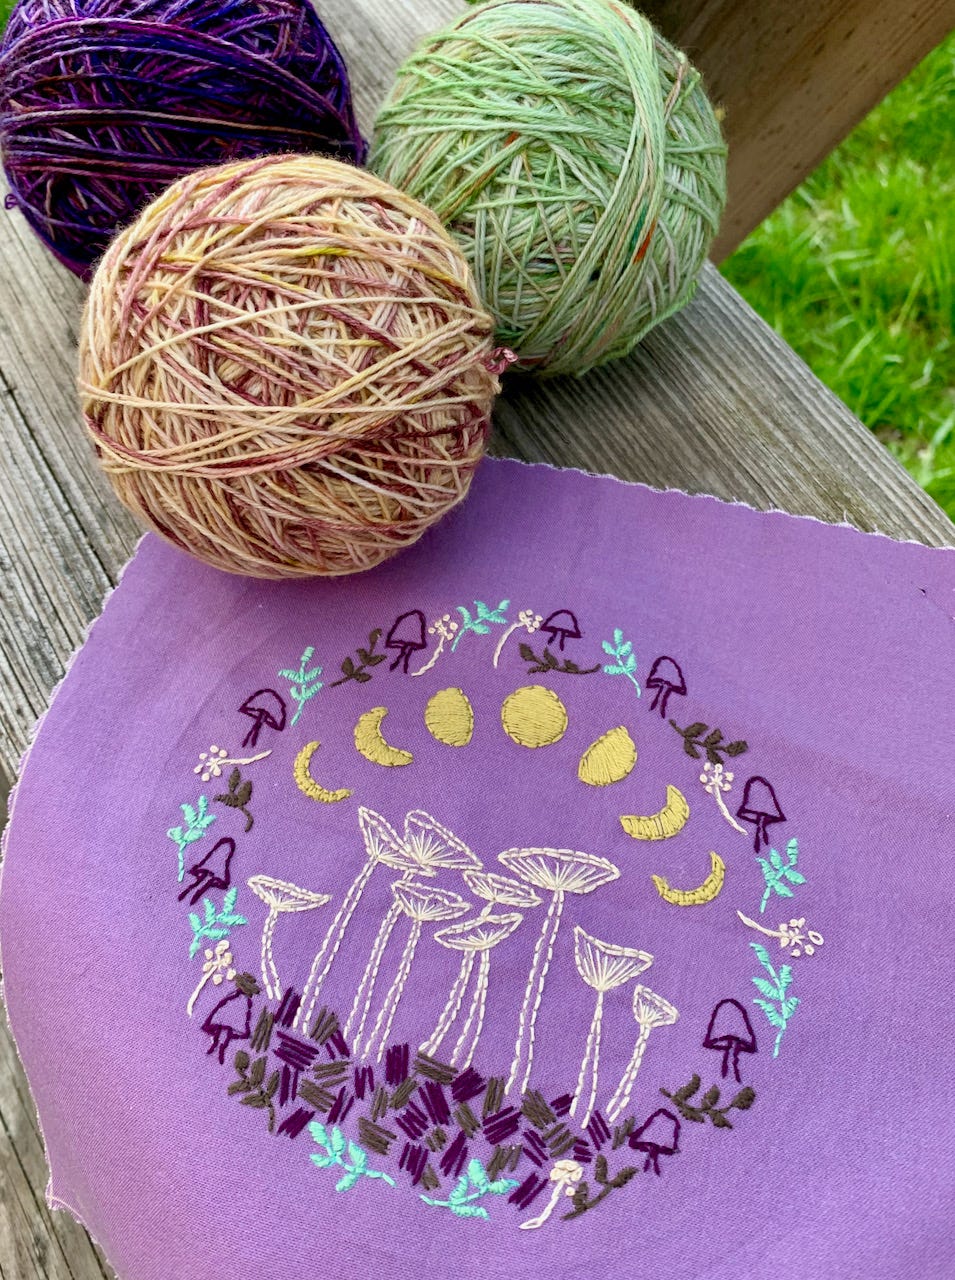 Three balls of yarn purple green peach, and a finished hand embroider piece of moon phases and mushrooms